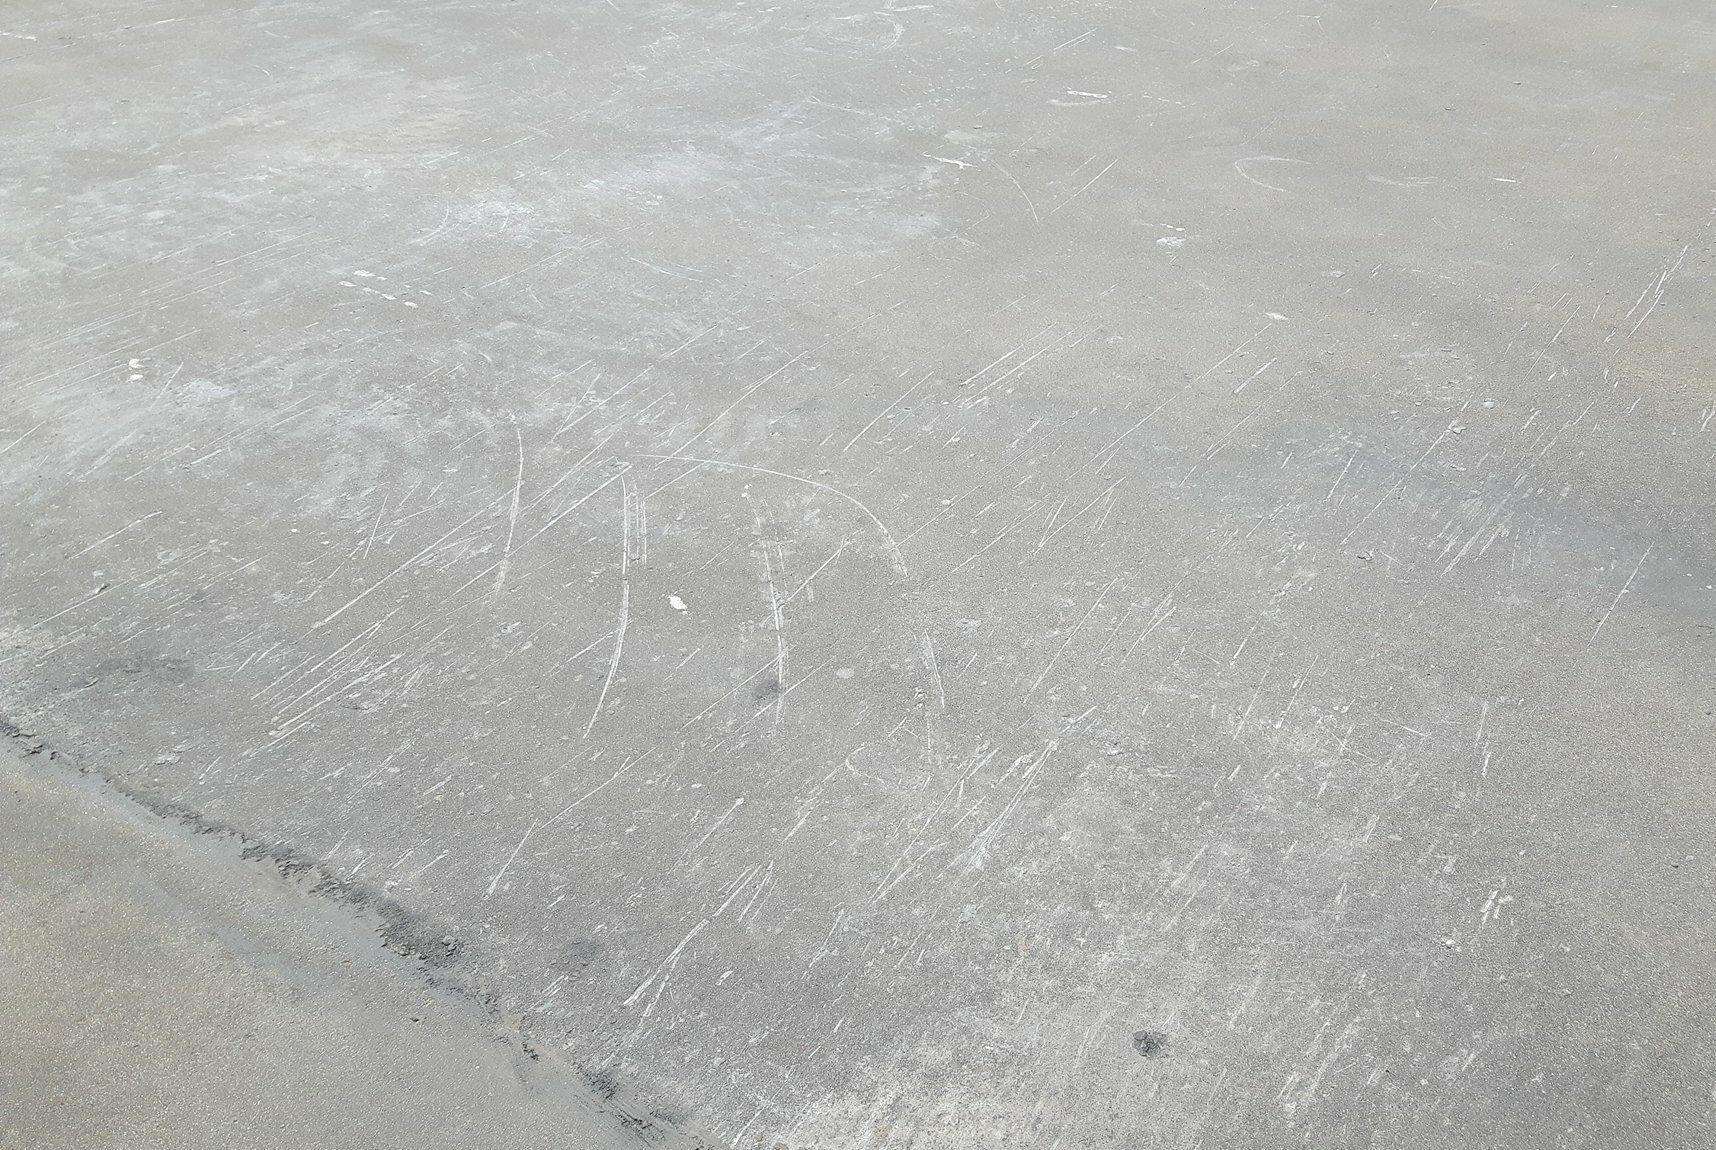 The new surface appears scratched by machinery (3595356)